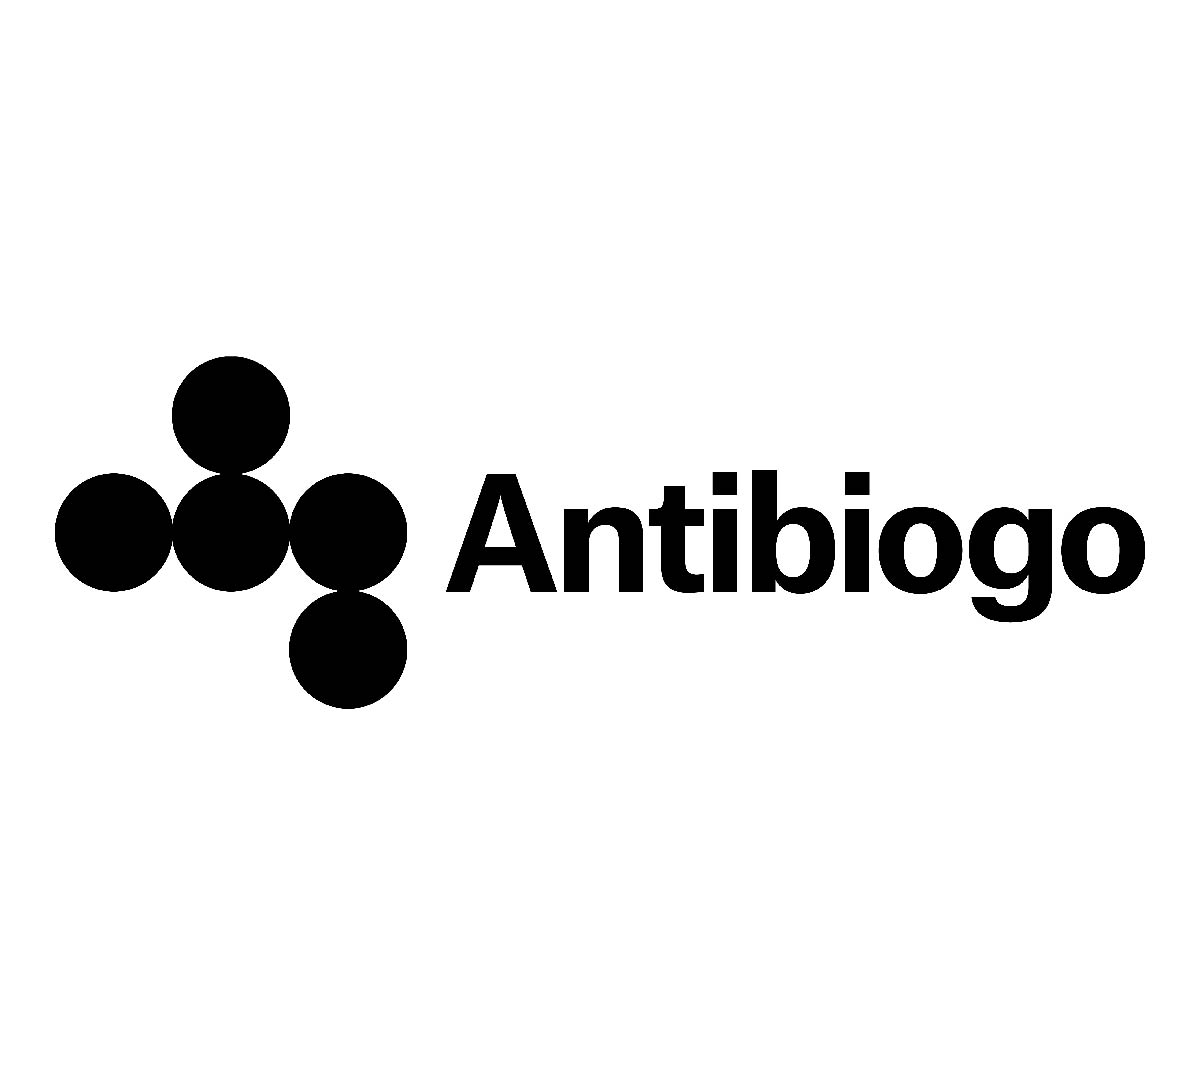 Read more about the article Antibiogo: a revolutionary application developed by Doctors Without Borders